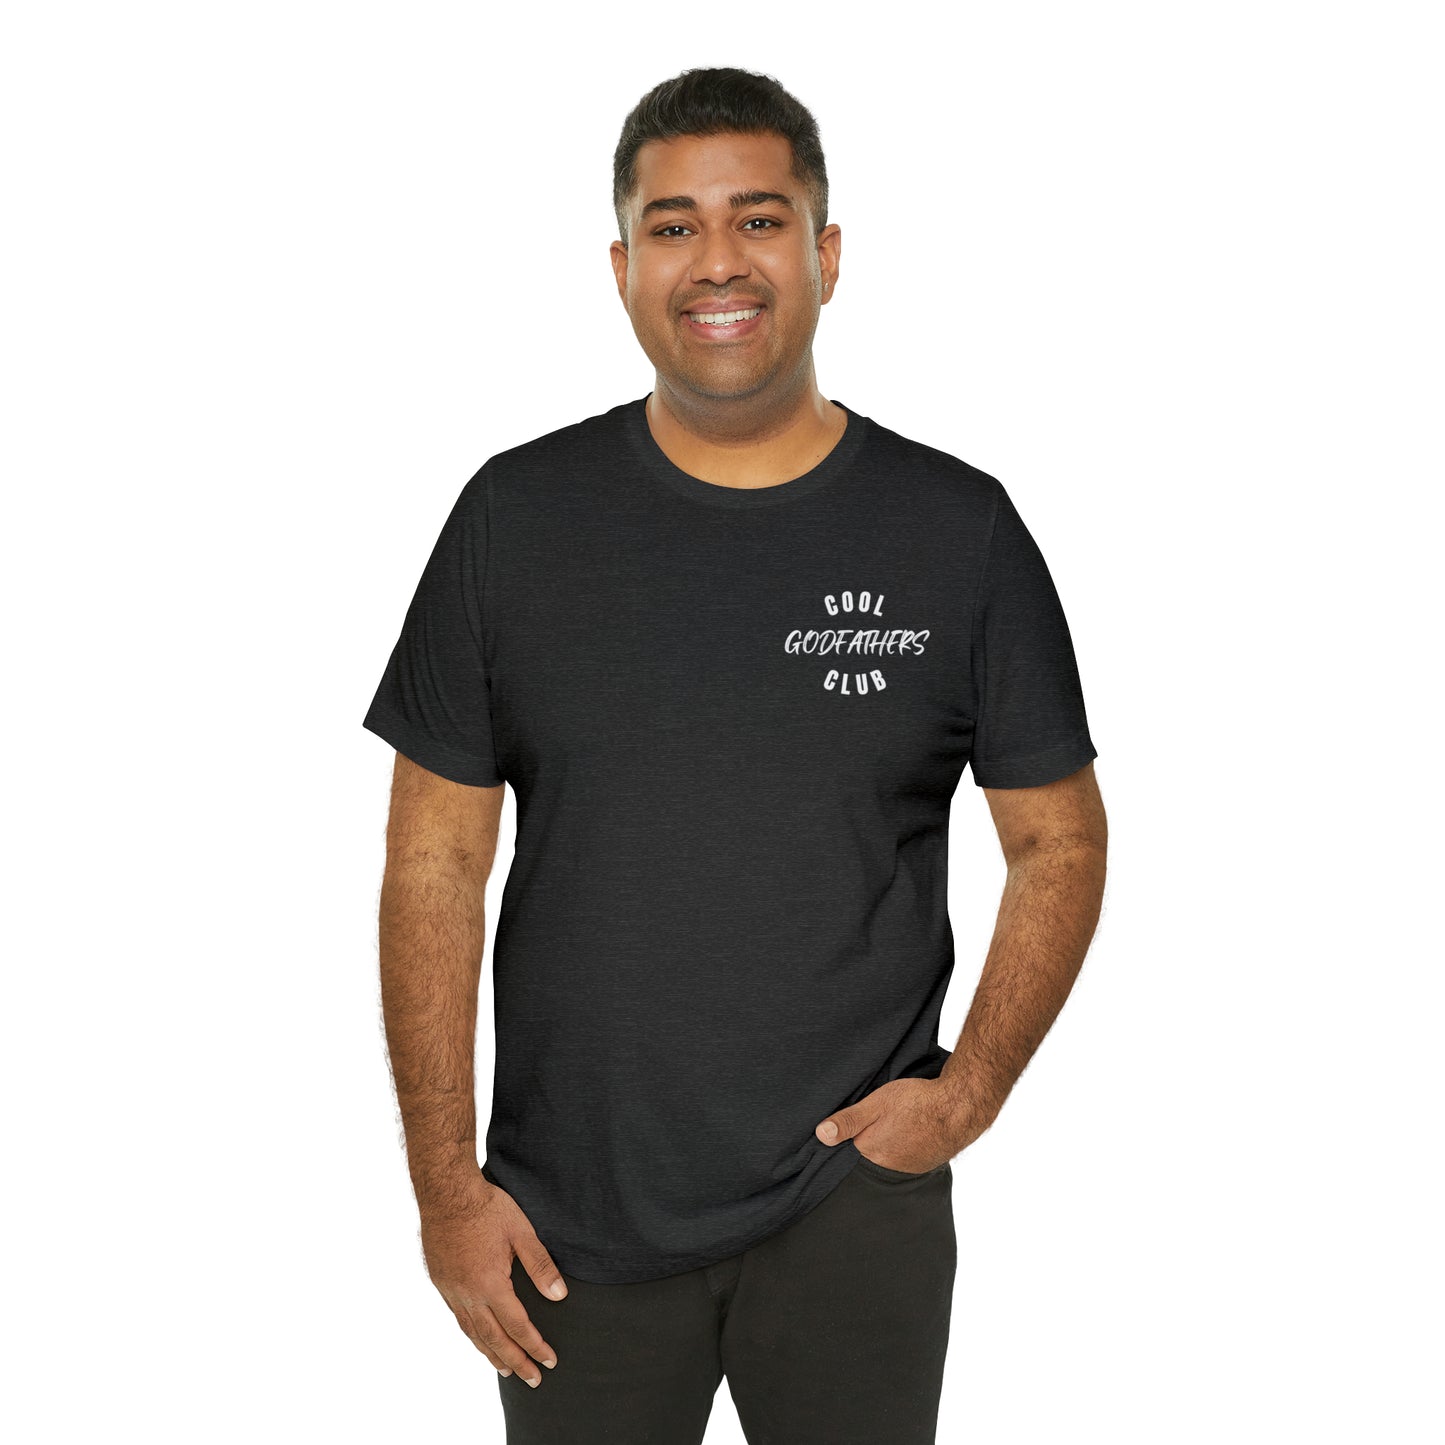 Cool Godfathers Club Shirt for Men, Funny Gift for Godfather to Be, T342